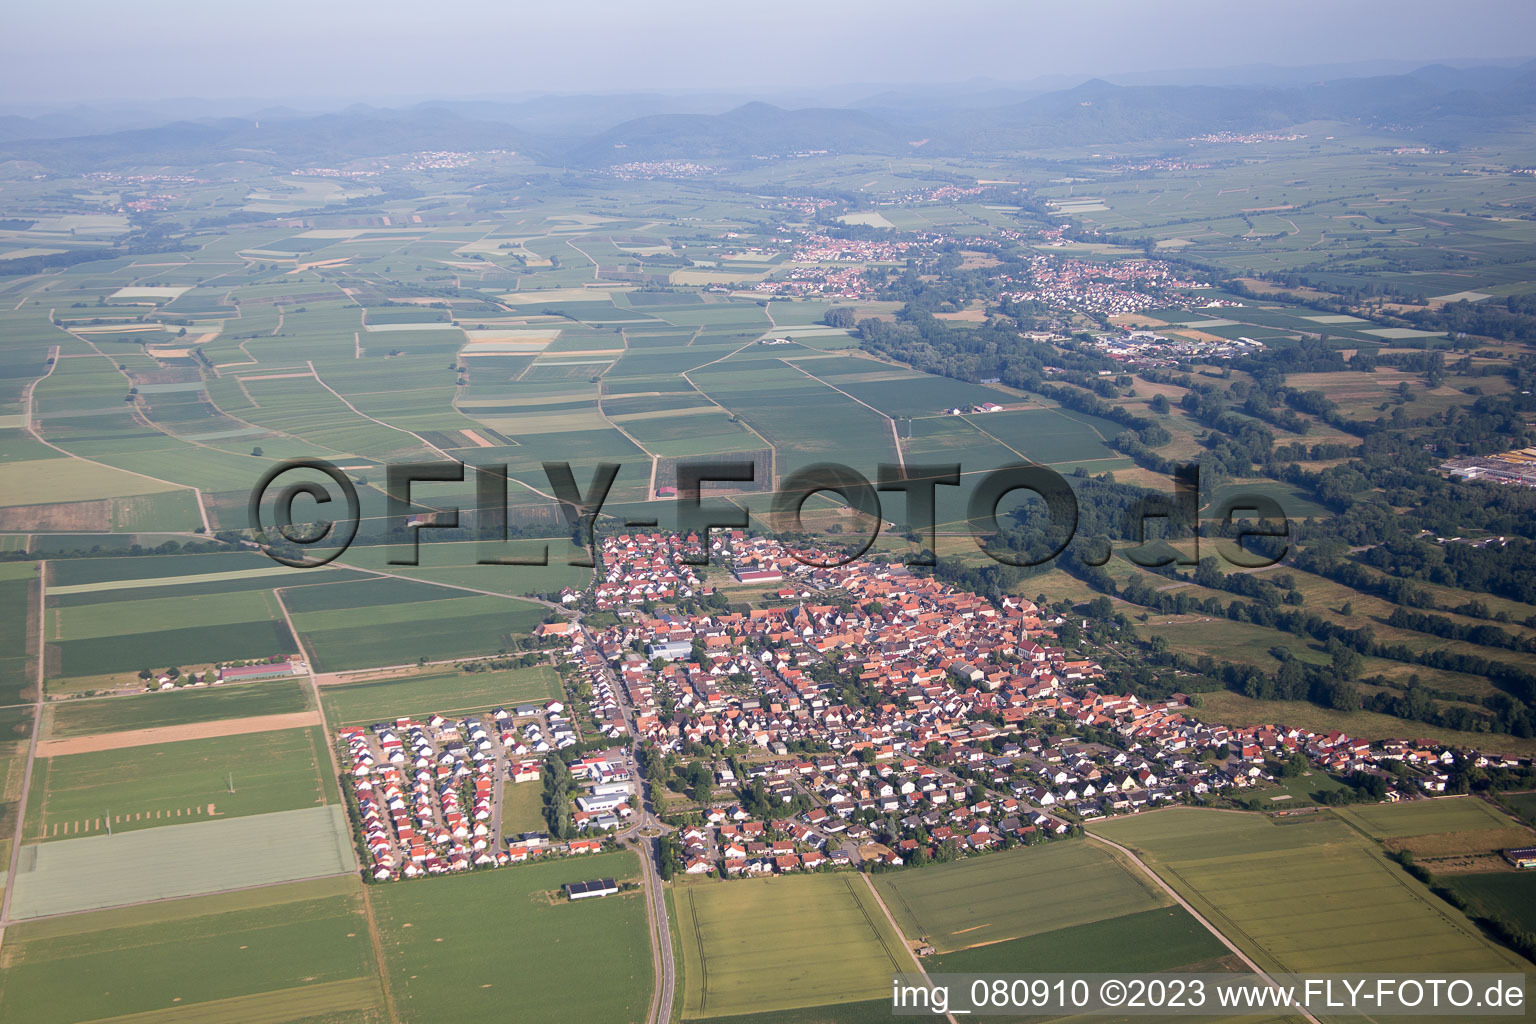 Steinweiler in the state Rhineland-Palatinate, Germany viewn from the air